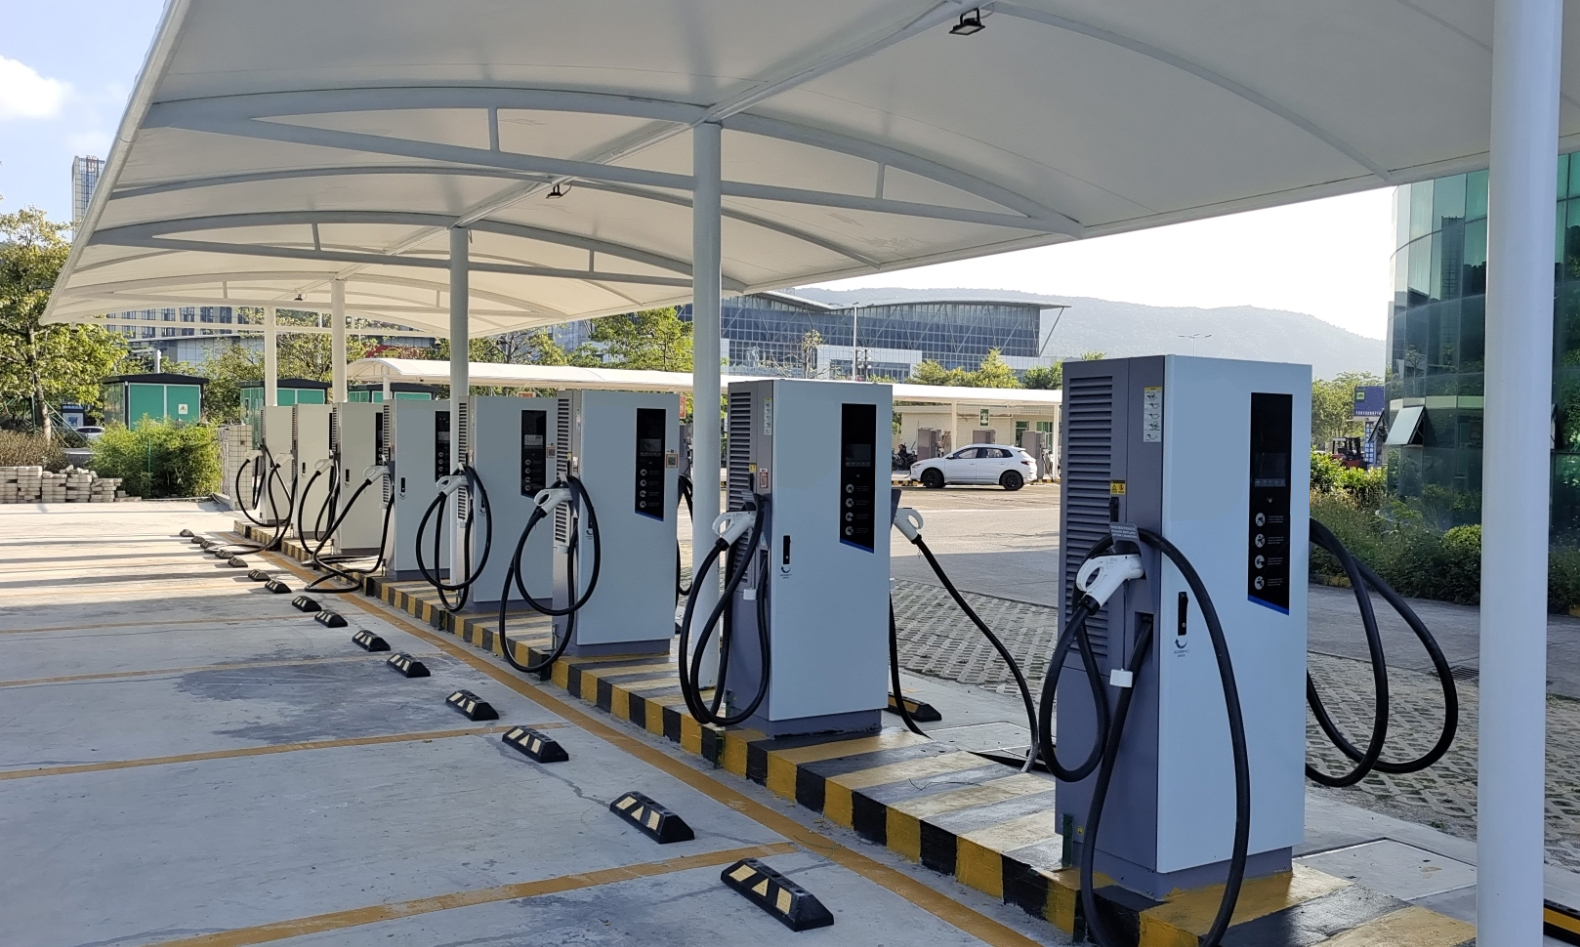 Covered electric vehicle charging station with multiple charging units in an outdoor setting.